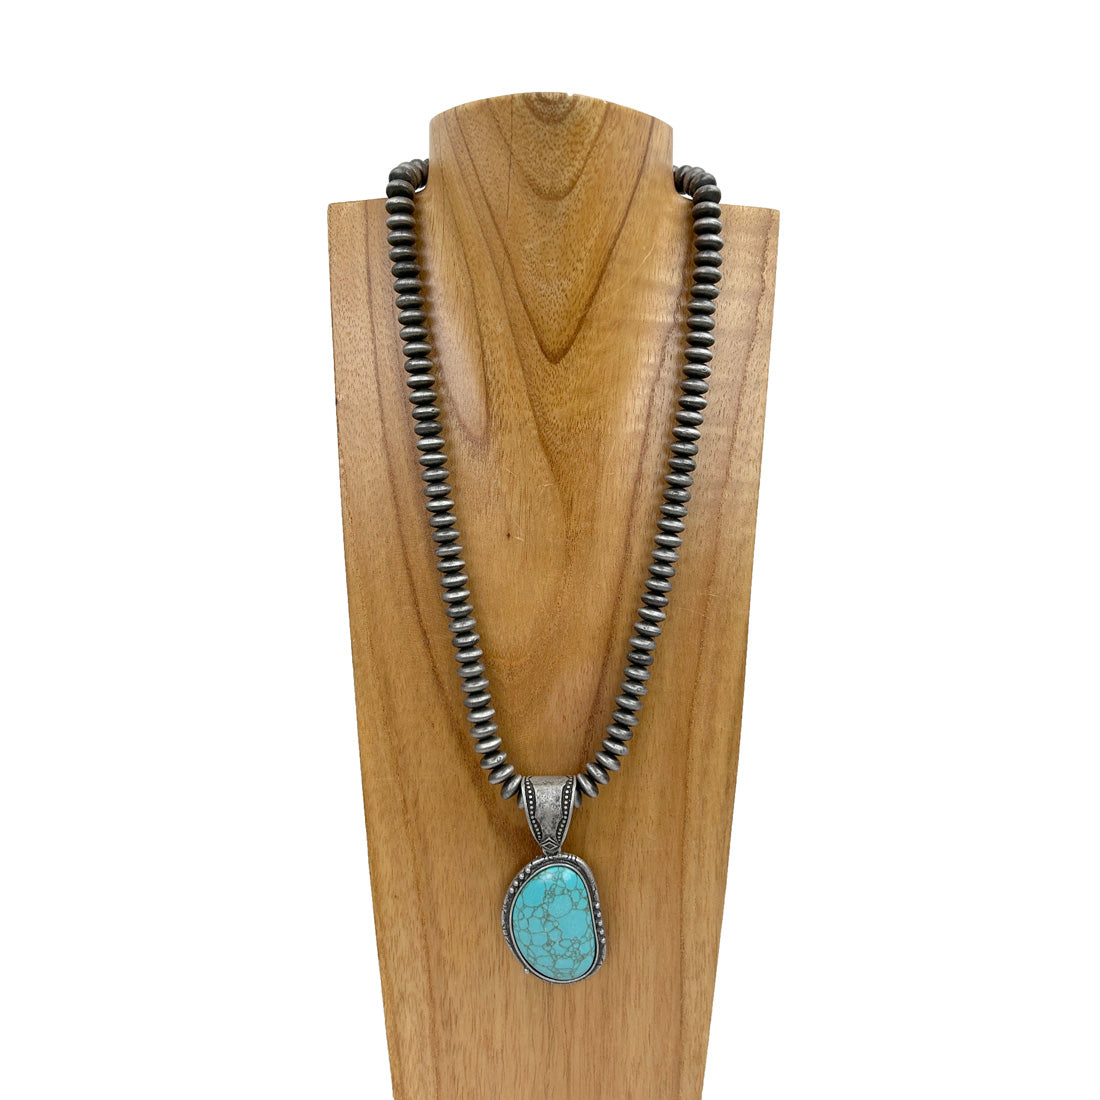 NKS230529-01-BLUE     "21 inches silver roundel Navajo pearl bead with blue turquoise stone pendent Necklace"